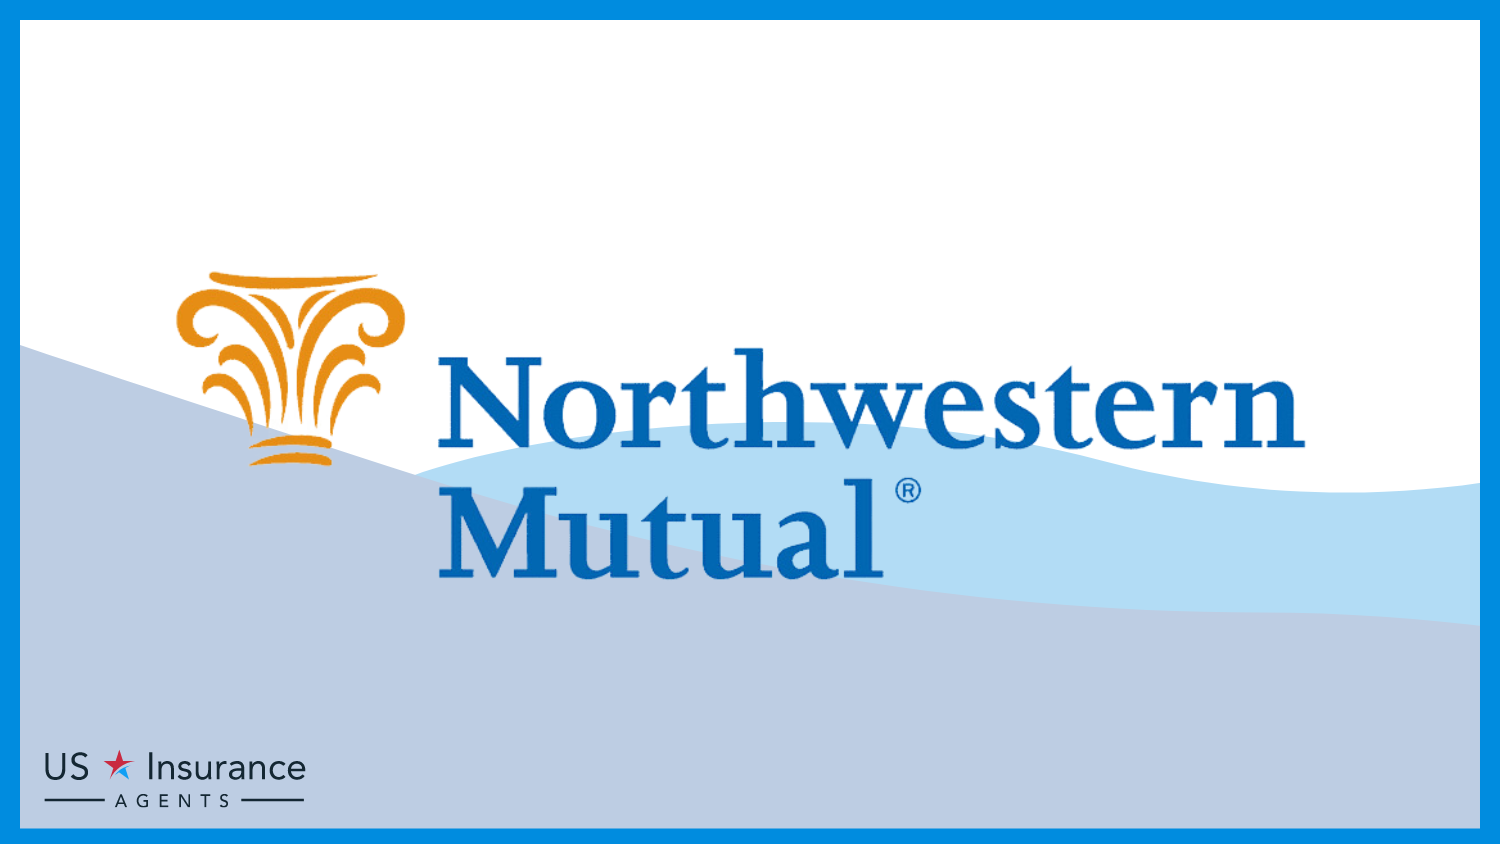 Best Life Insurance for High-Net-Worth Individuals: Northwestern Mutual